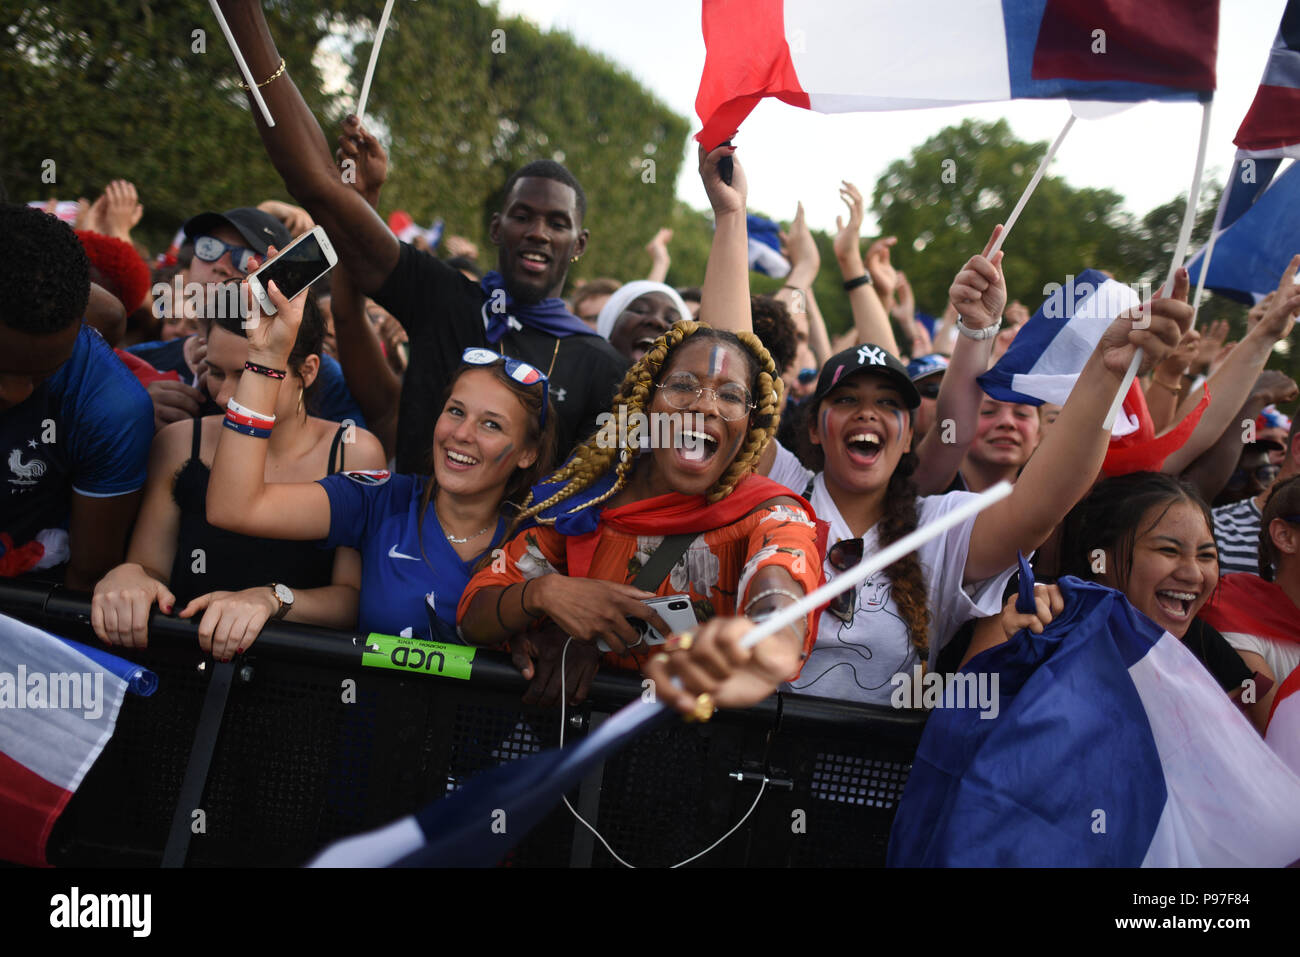 Paris France 15th July 18 Supporters Of The French Football Team At The Champ De Mars